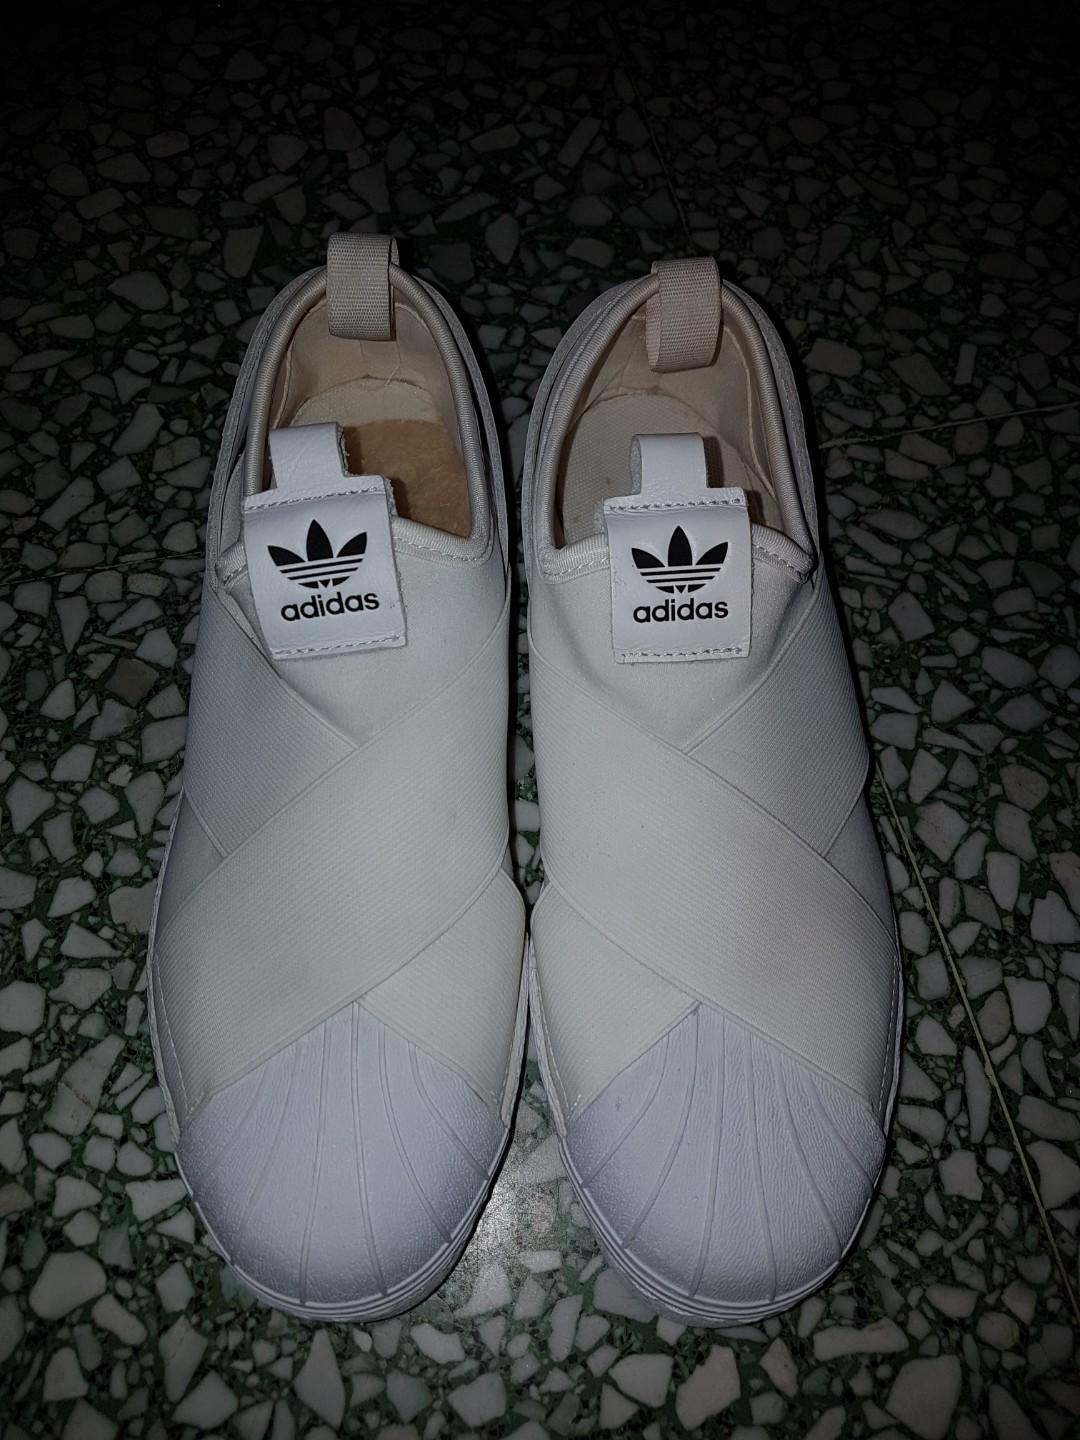 Adidas Superstar Slip On in White (Size 6.5), Women's Fashion, Shoes,  Sneakers on Carousell